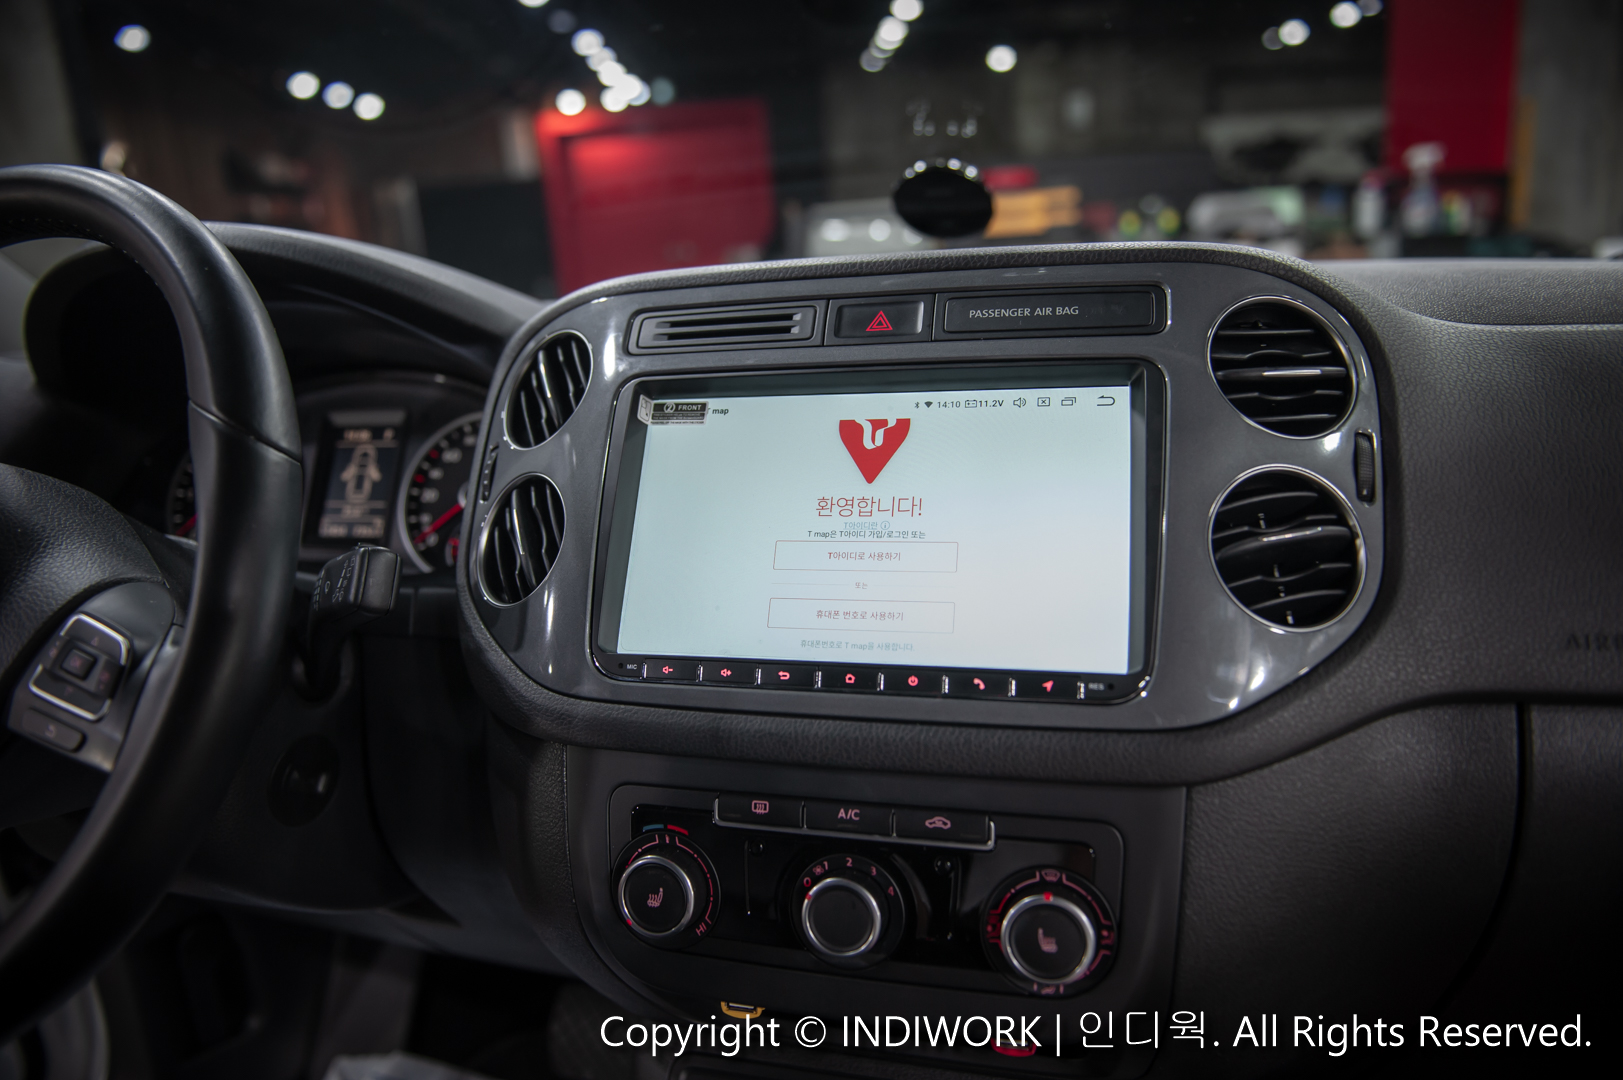 VW RCD310 to Android All in One (CarPC) 2015 Volkswagen Tiguan